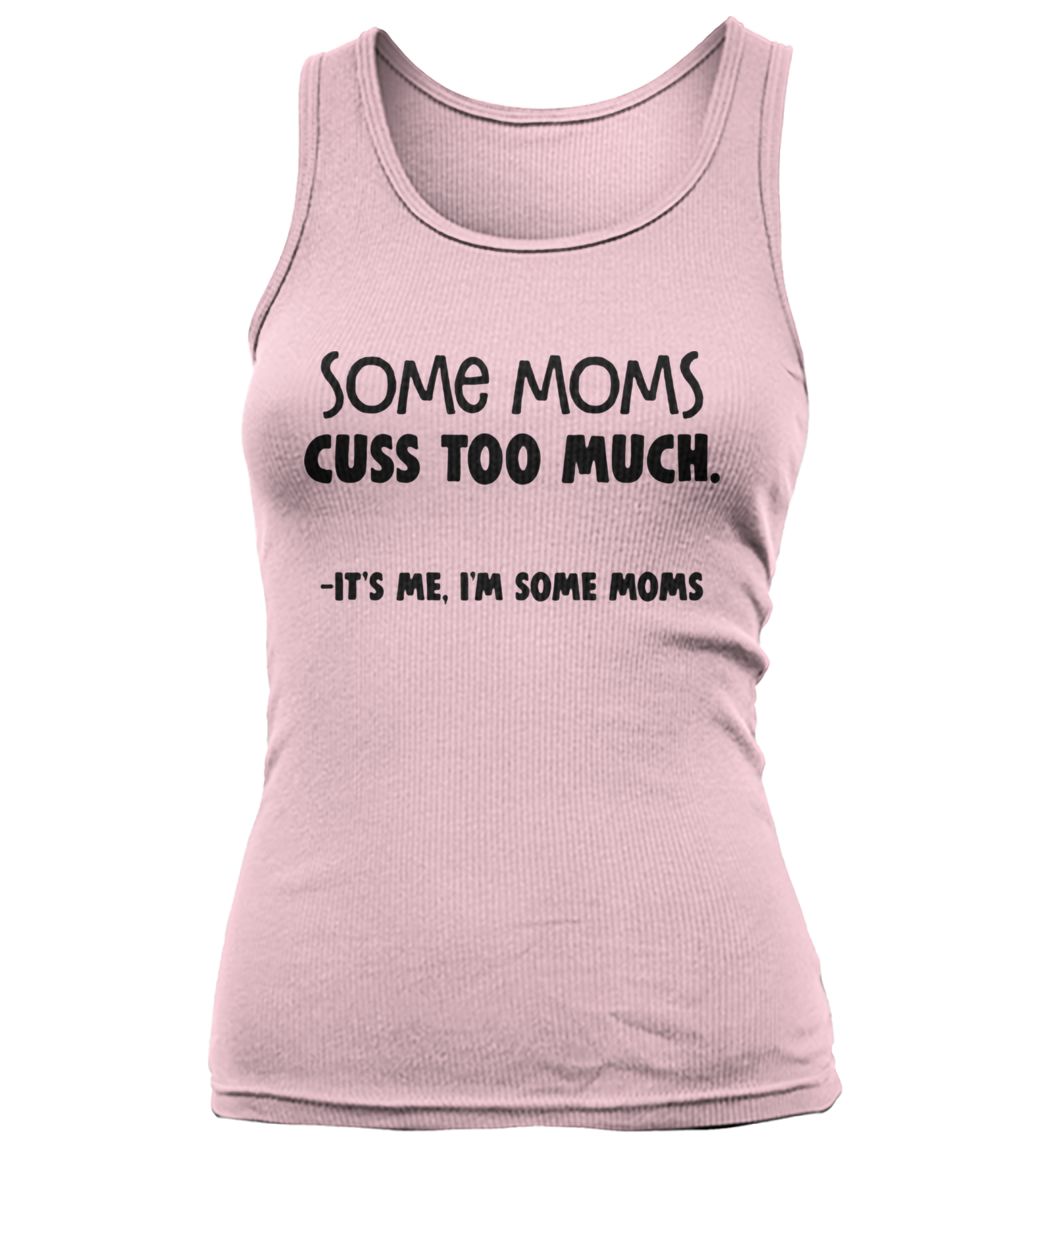 Some moms cuss too much it's me I'm some moms women's tank top